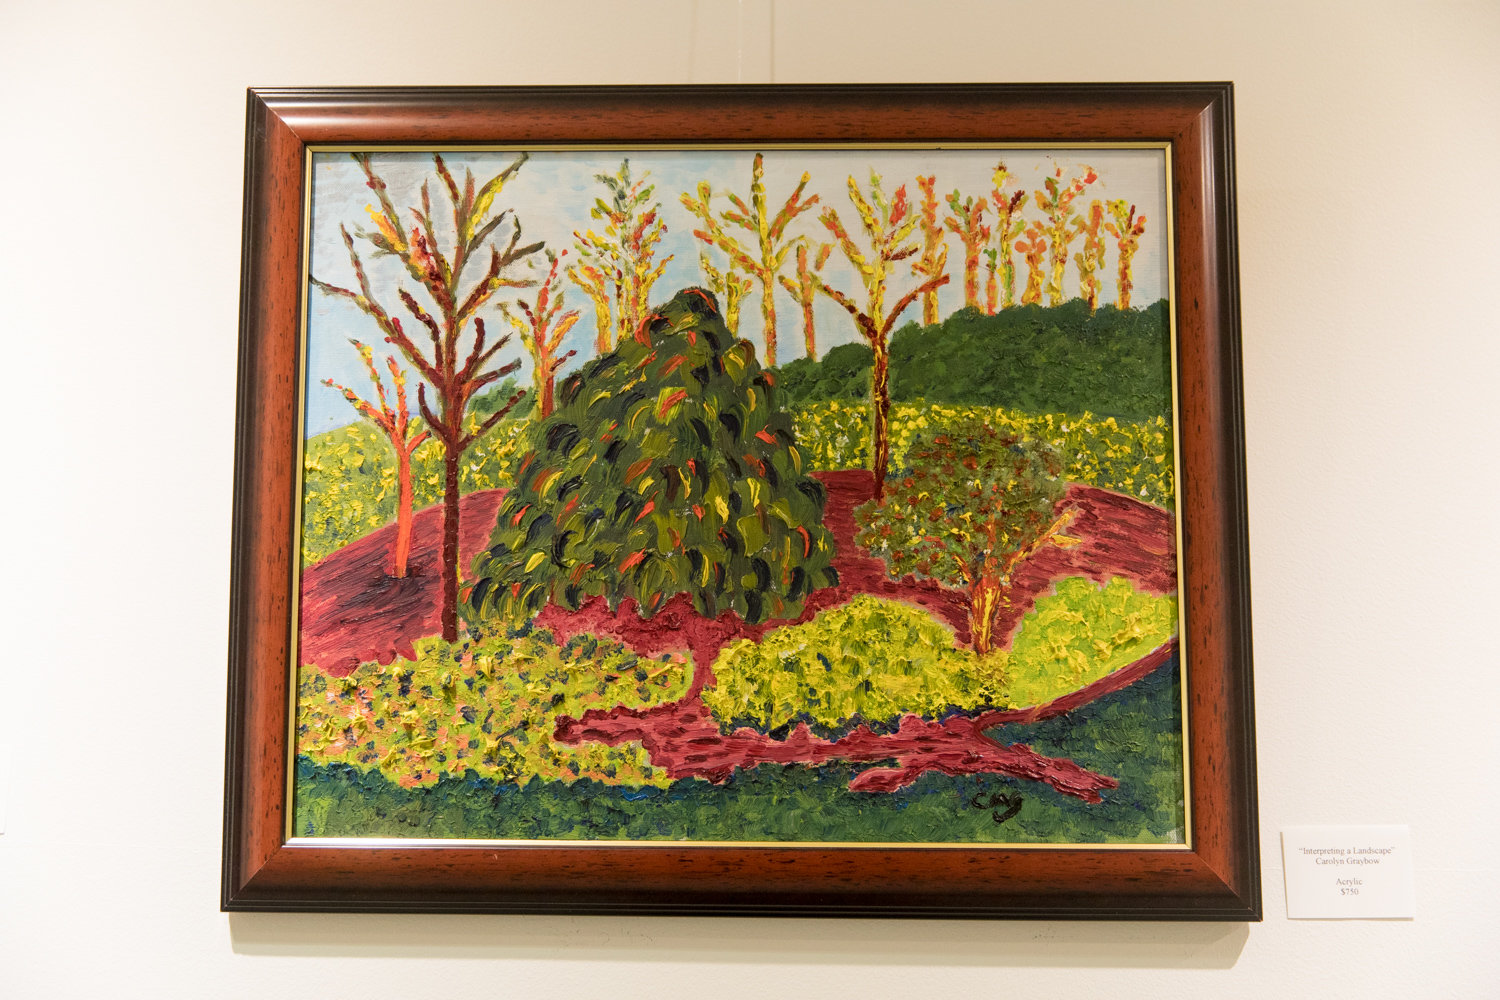 Carolyn Graybow’s painting ‘Interpreting a Landscape’ is included in the exhibition ‘Tree Time,’ on display at The Riverdale Y through Nov. 3.